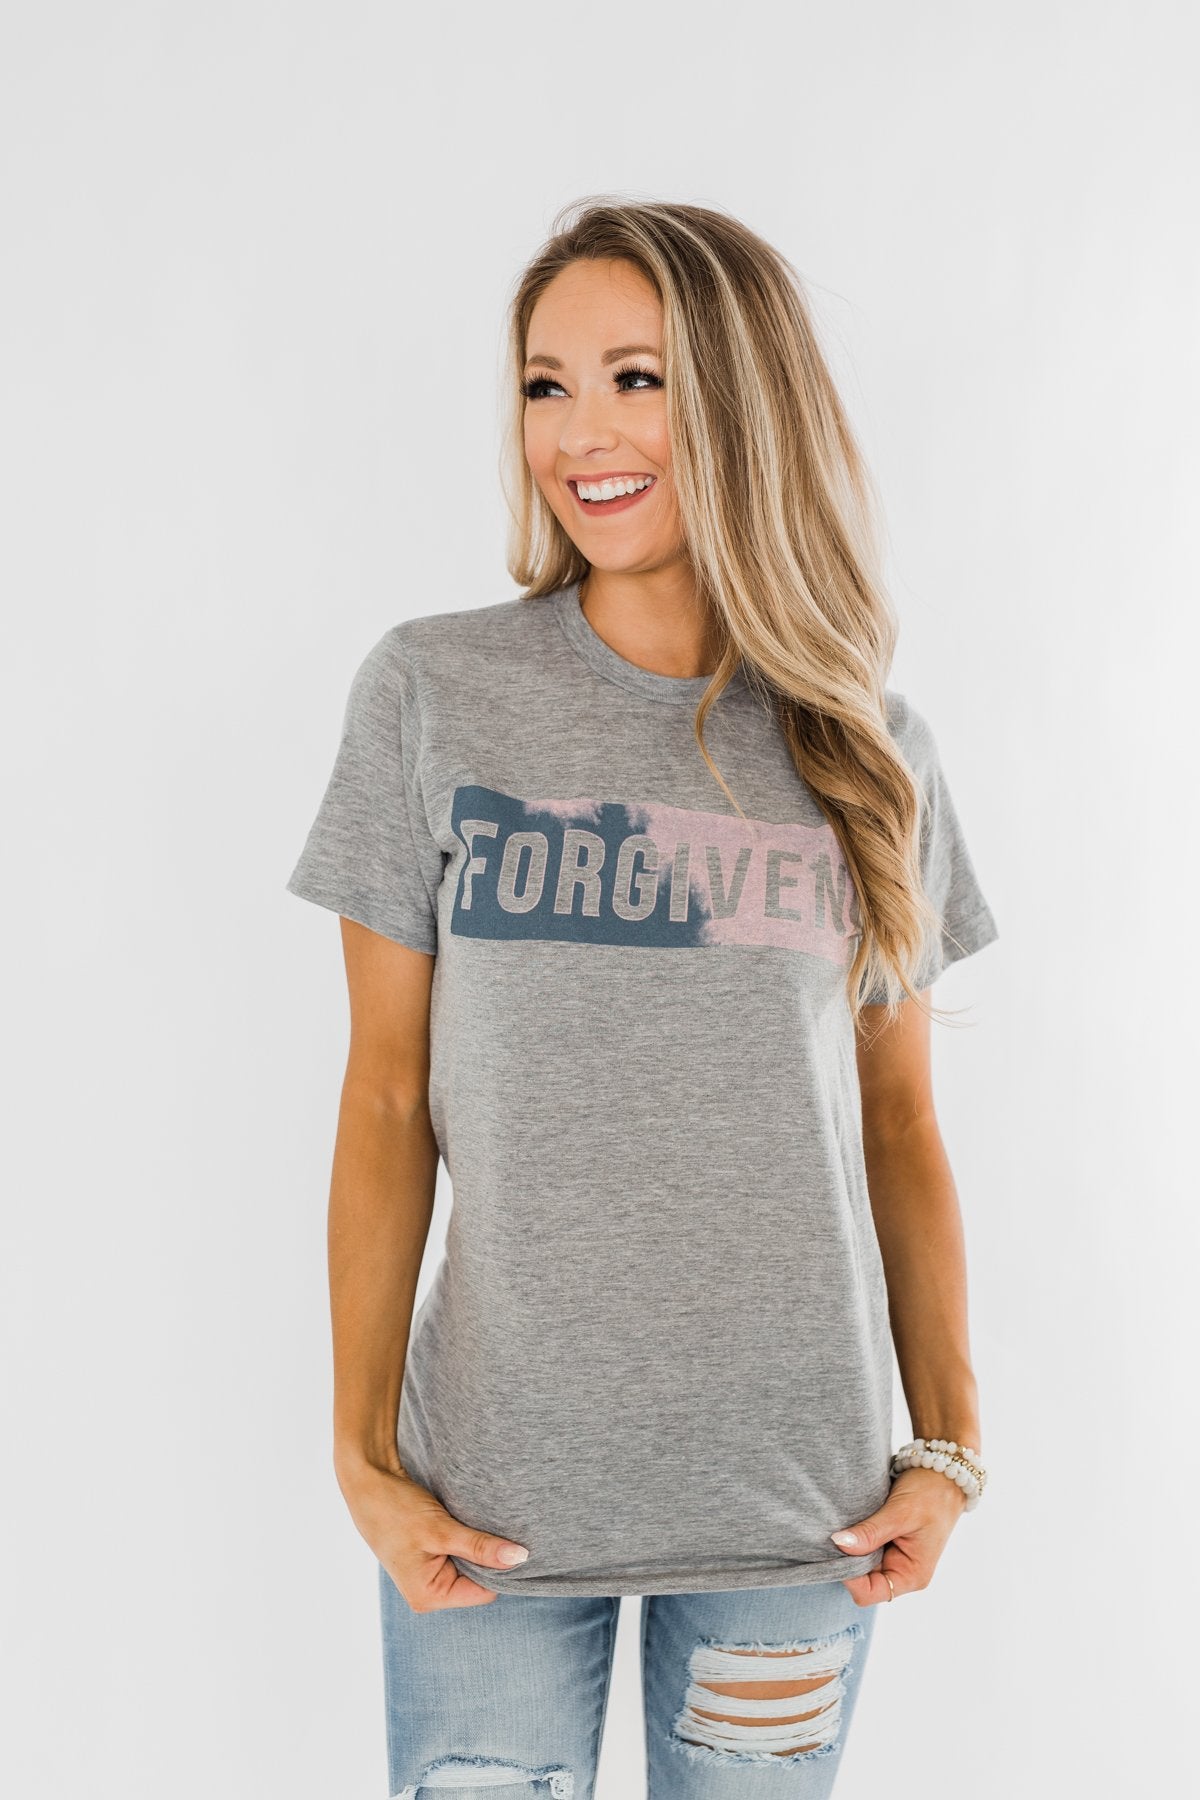 "Forgiven" Graphic Tee- Grey